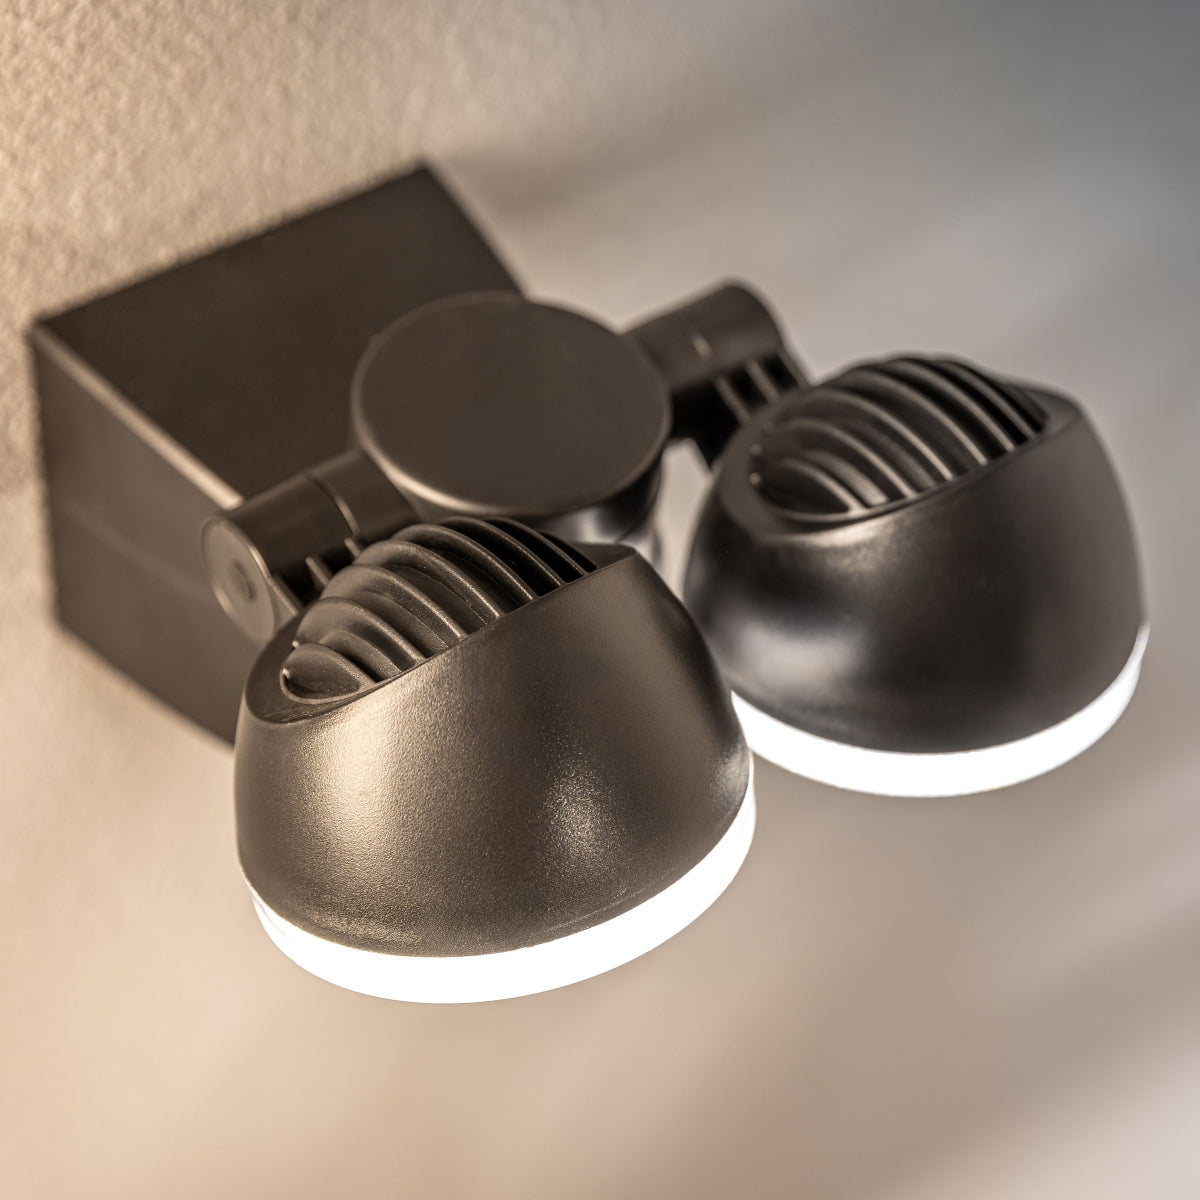 The Martha outdoor double spotlight is a stylish and fashionable outdoor solution for your home.  The easily adjustable heads of this outdoor wall lamp allow it to be used functionally for lighting paths and aesthetically decorate the walls of your home with a beautiful, bright glow. Made from polycarbonate making it rust proof. 